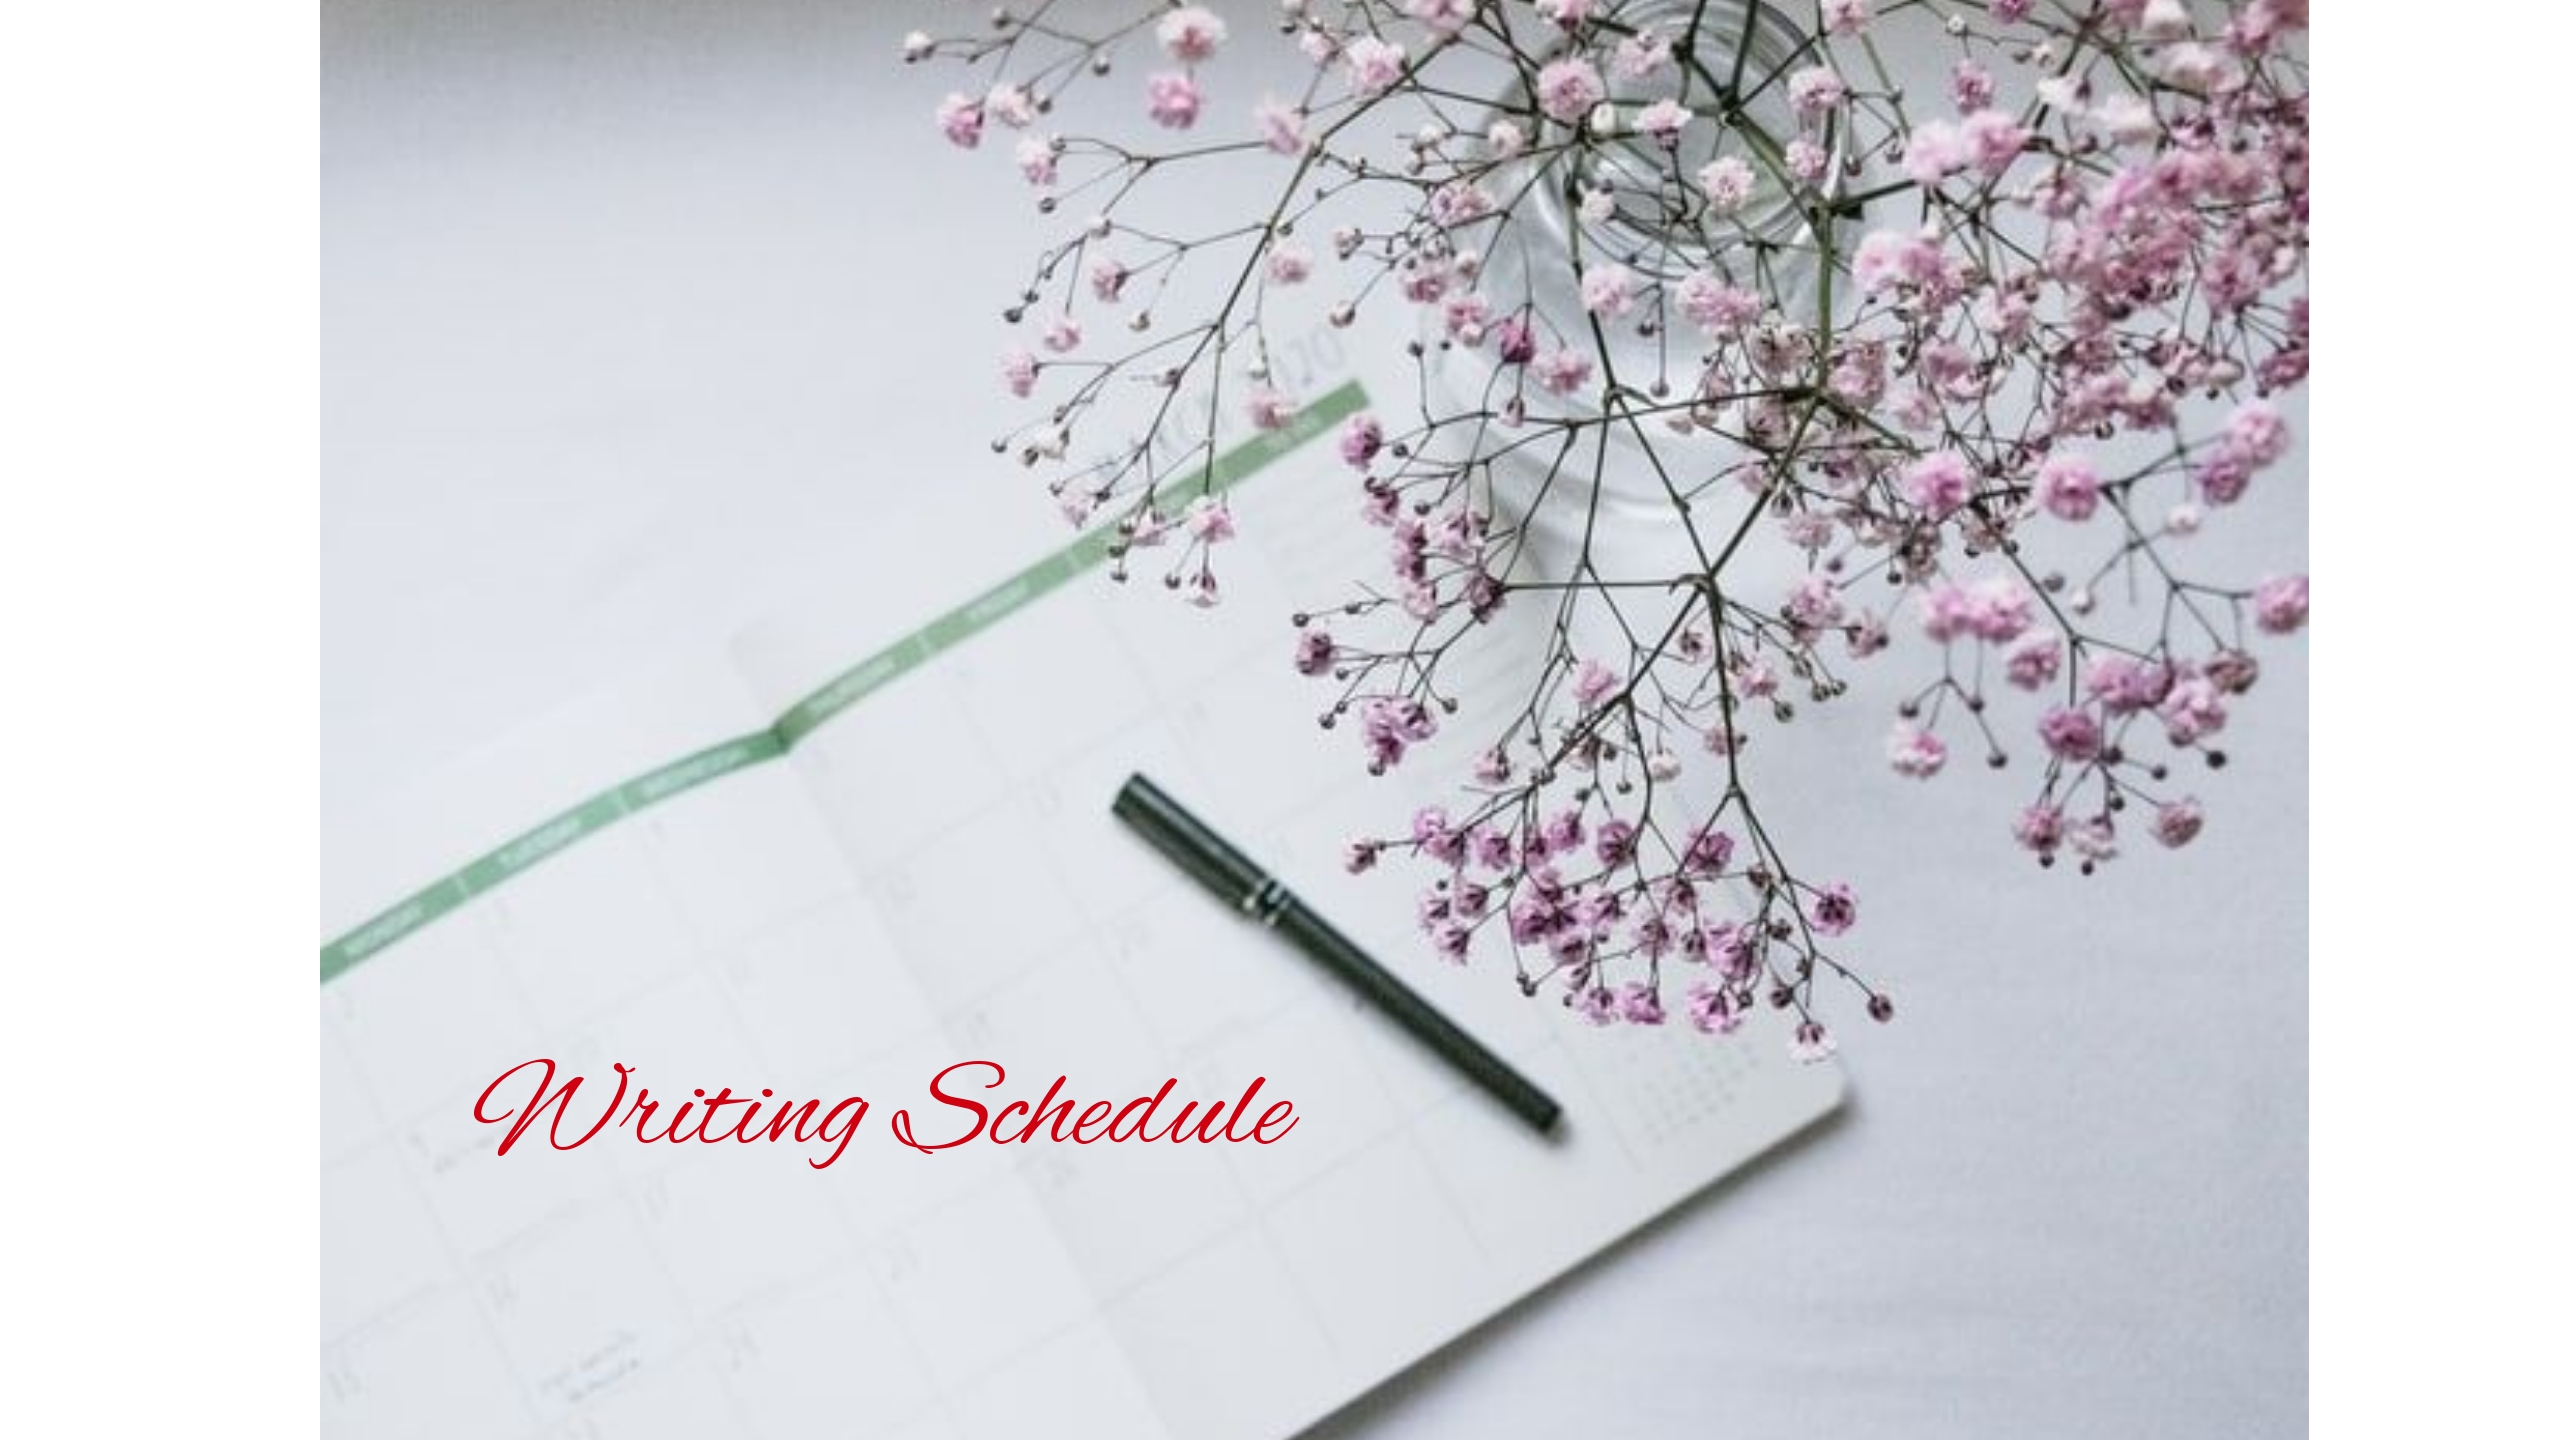 How to create a writing schedule